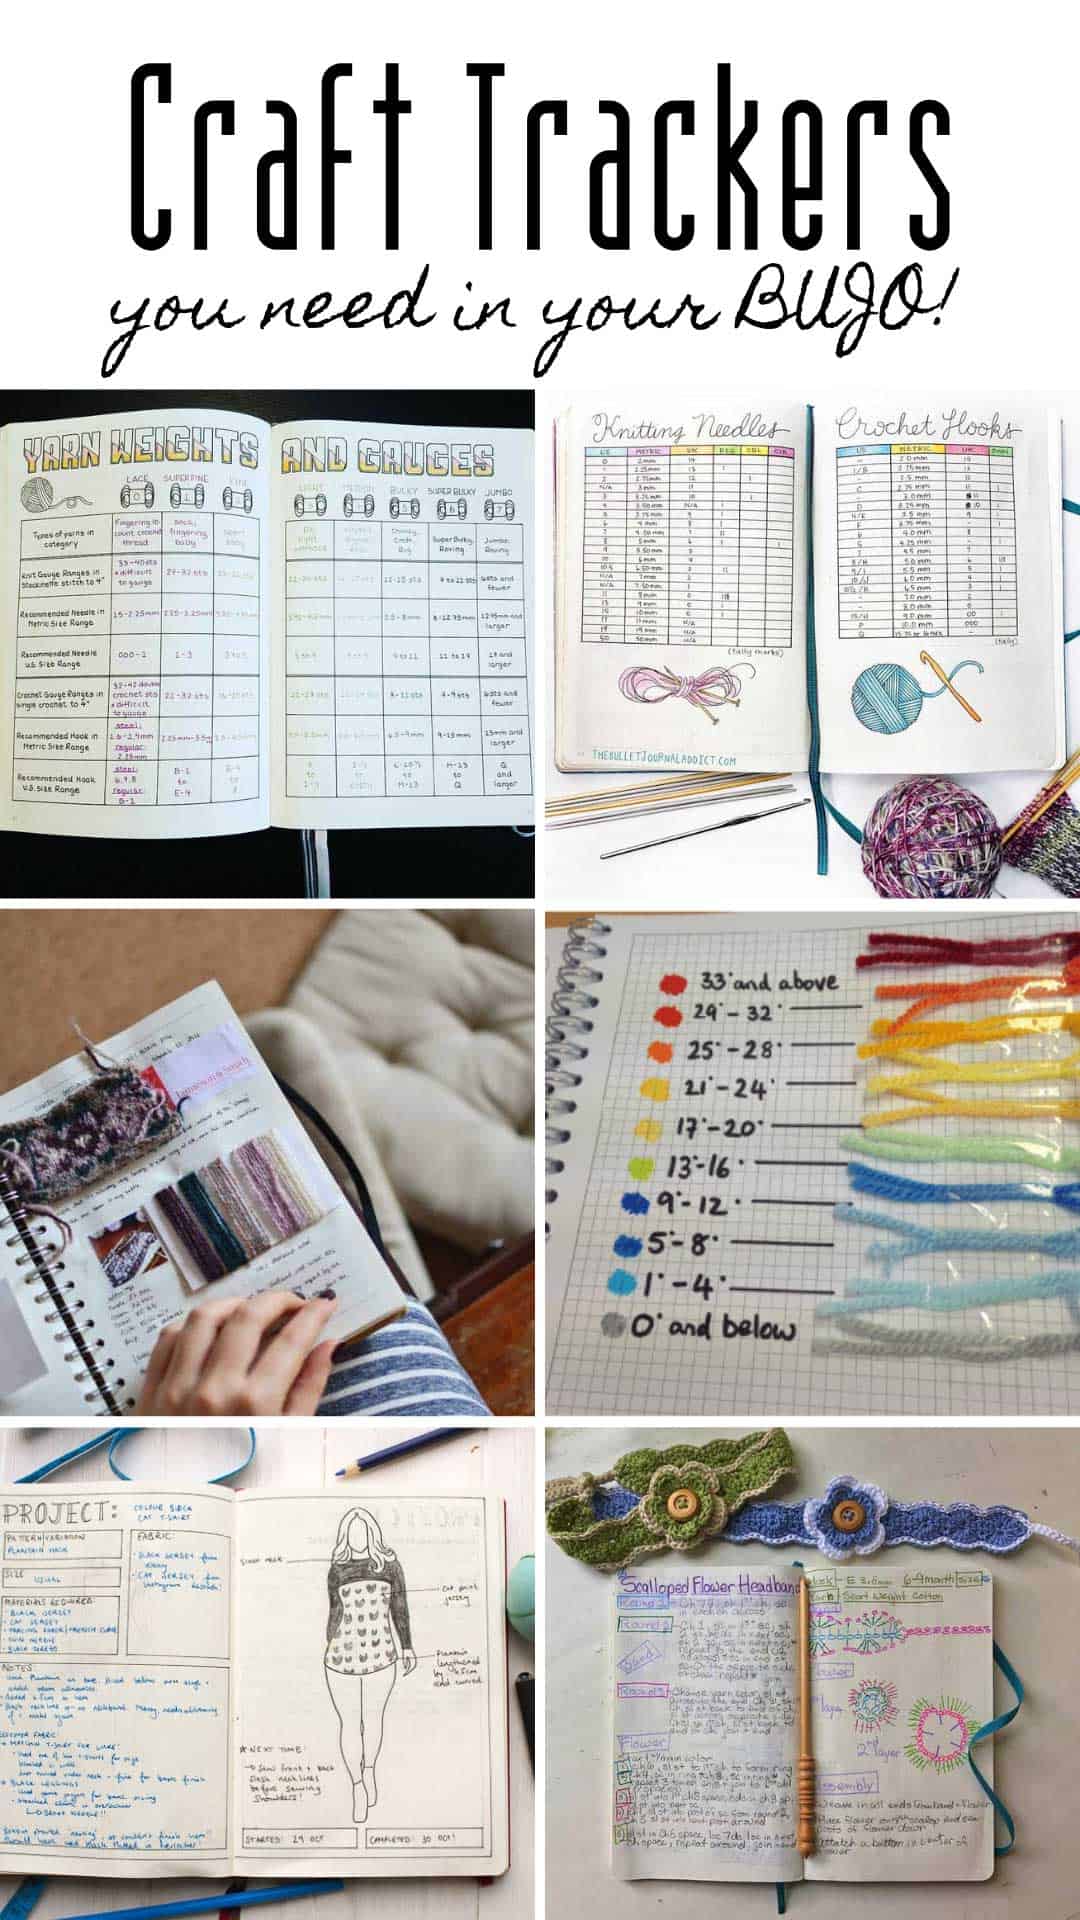 Craft Journal Ideas to Help You Keep Track of Your Creative Projects